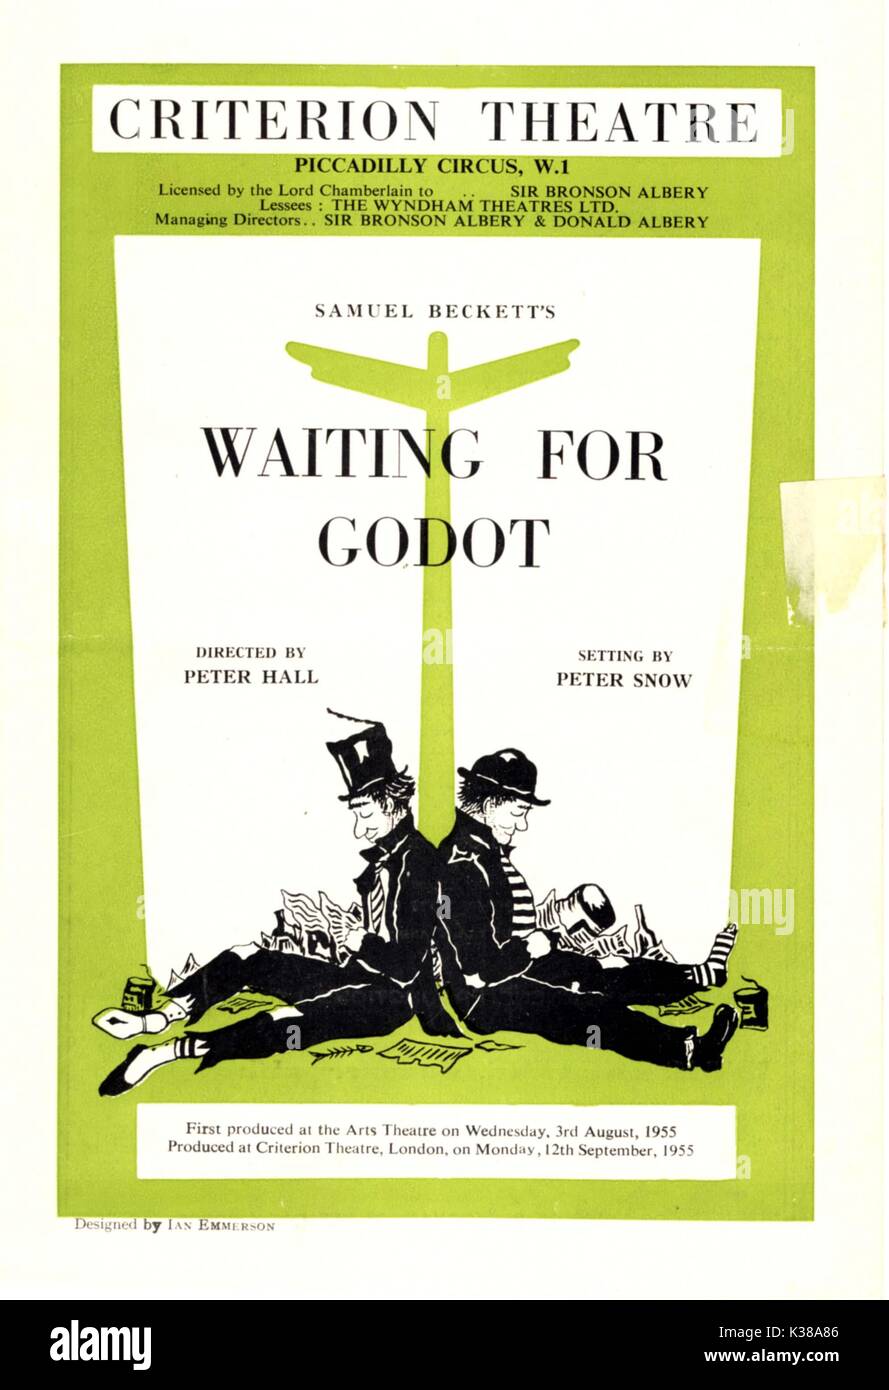 PROGRAMME FOR THE FIRST PRODUCTION OFWAITING FOR GODOT FROM THE RONALD GRANT ARCHIVE Stock Photo